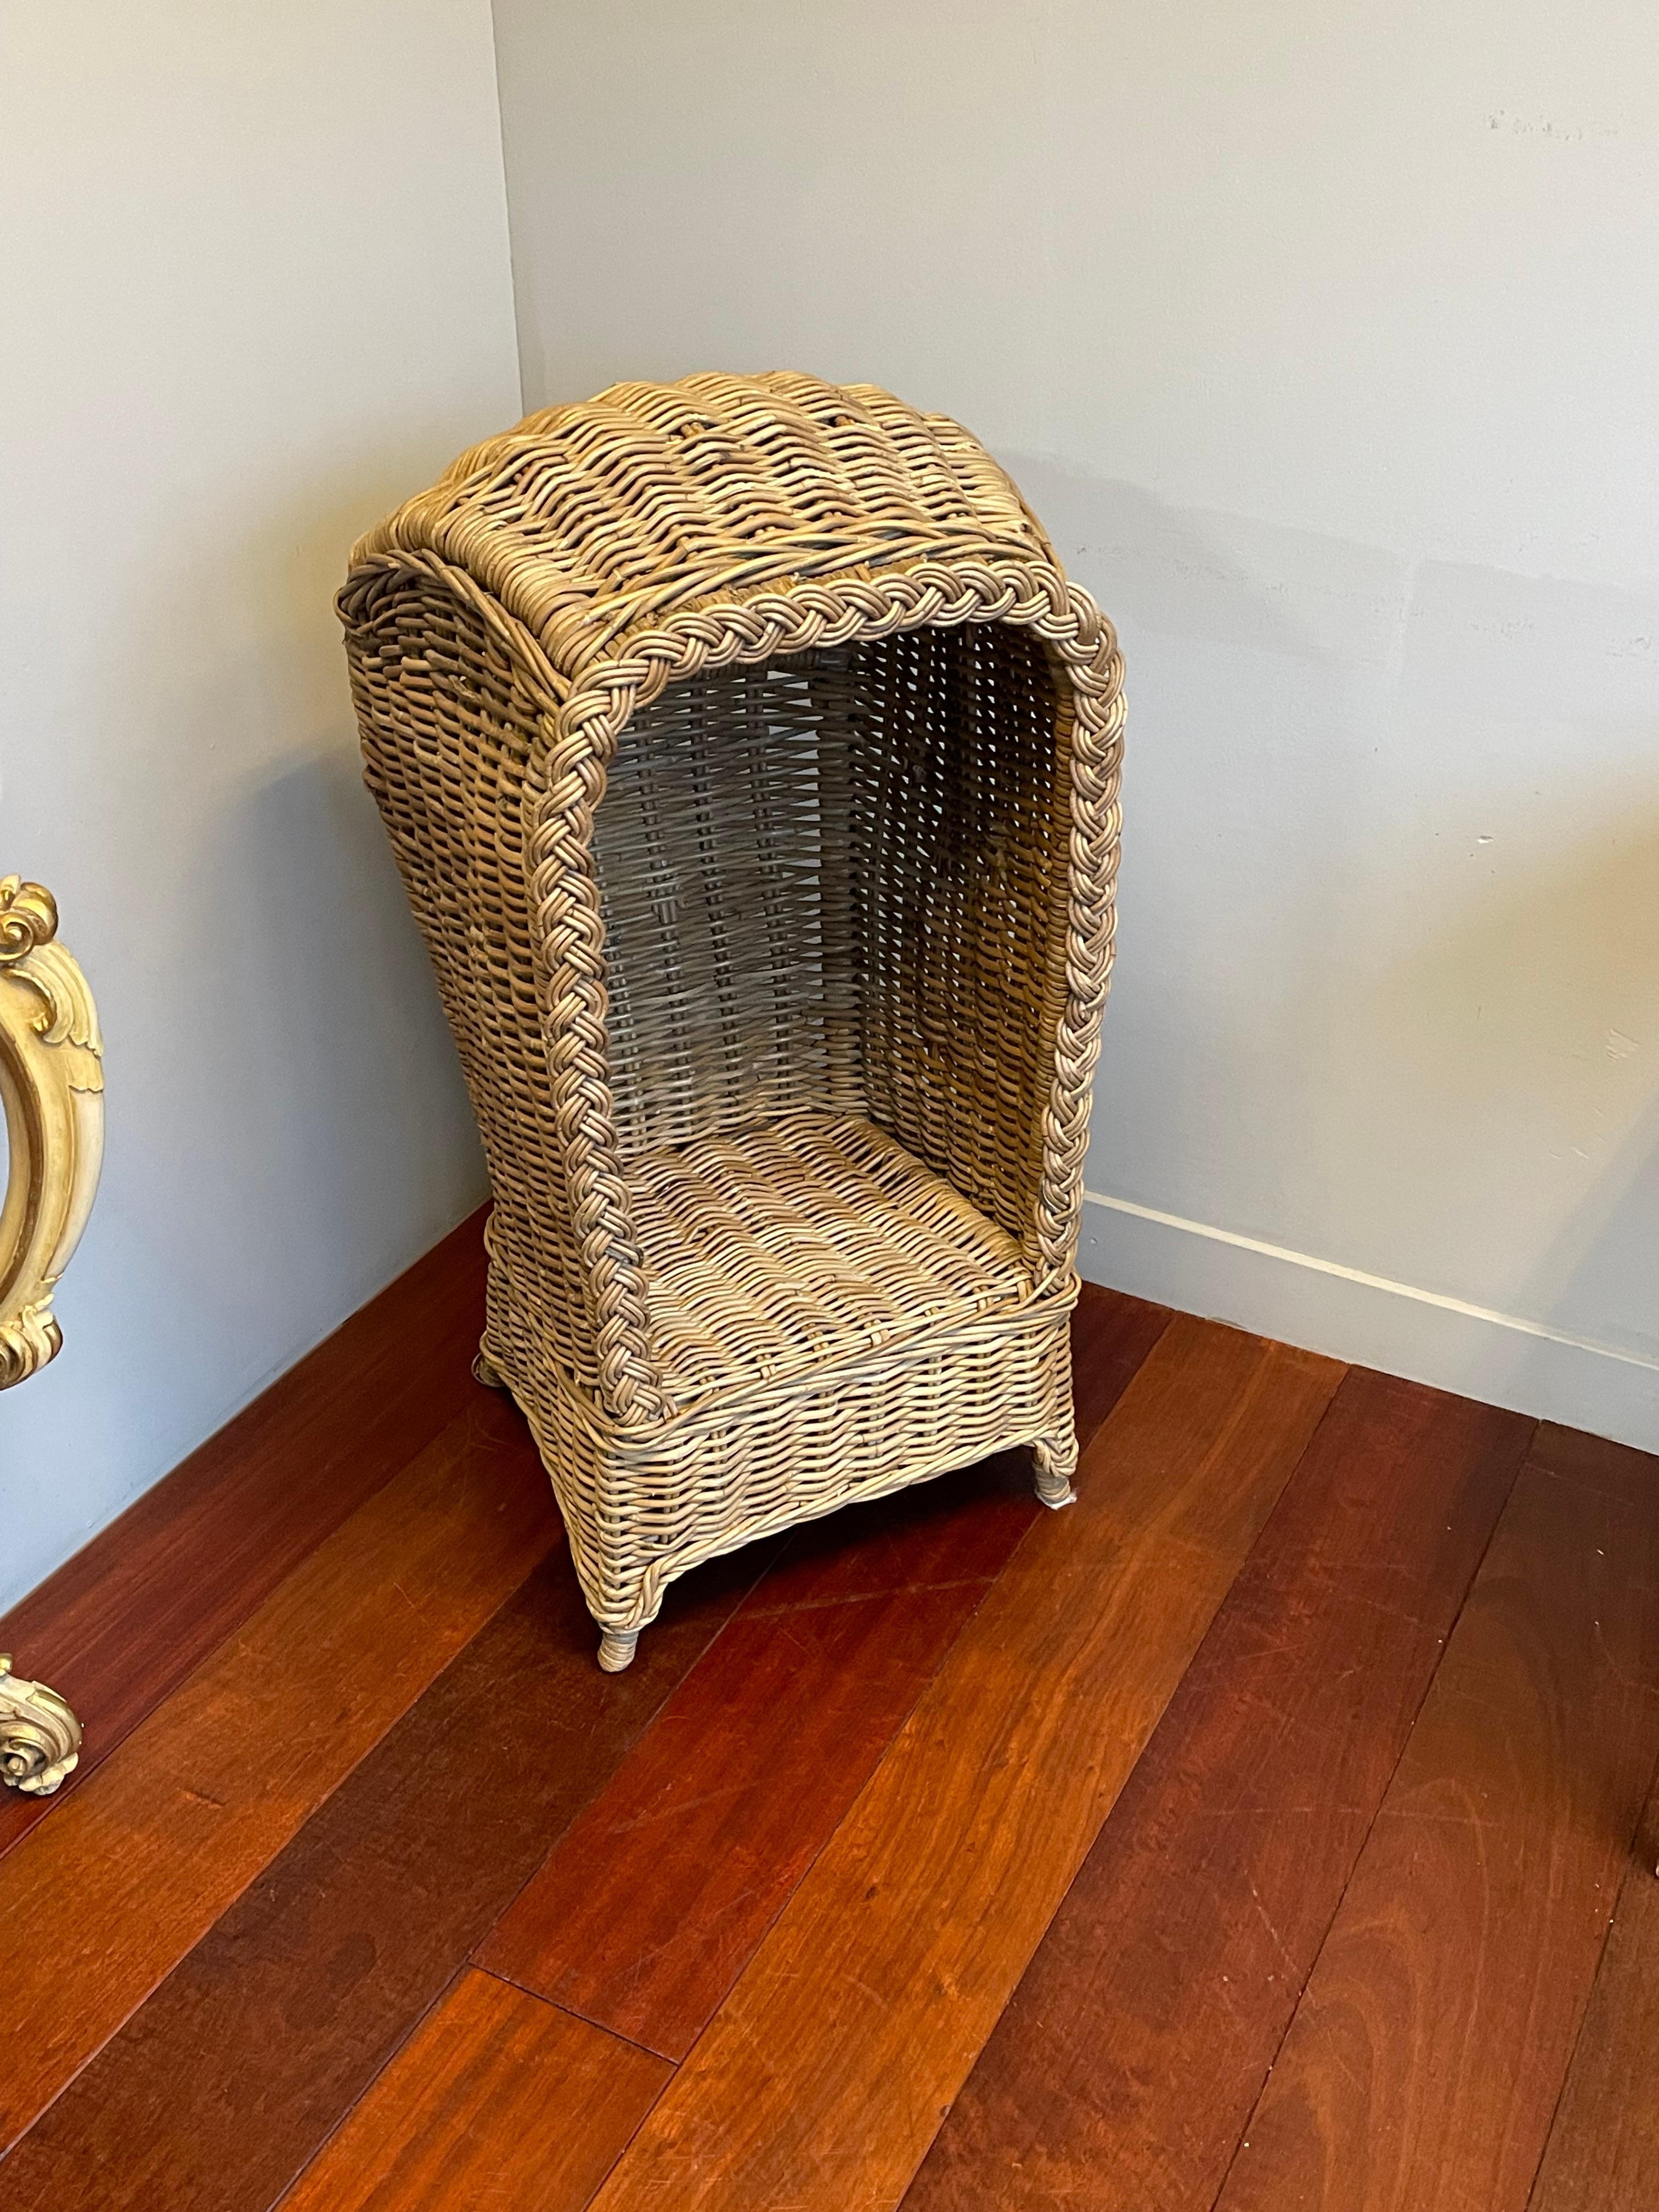 Hand-Crafted Very Rare & Super Decorative Antique-Like Hand Woven Rattan Beach Chair for Kids For Sale